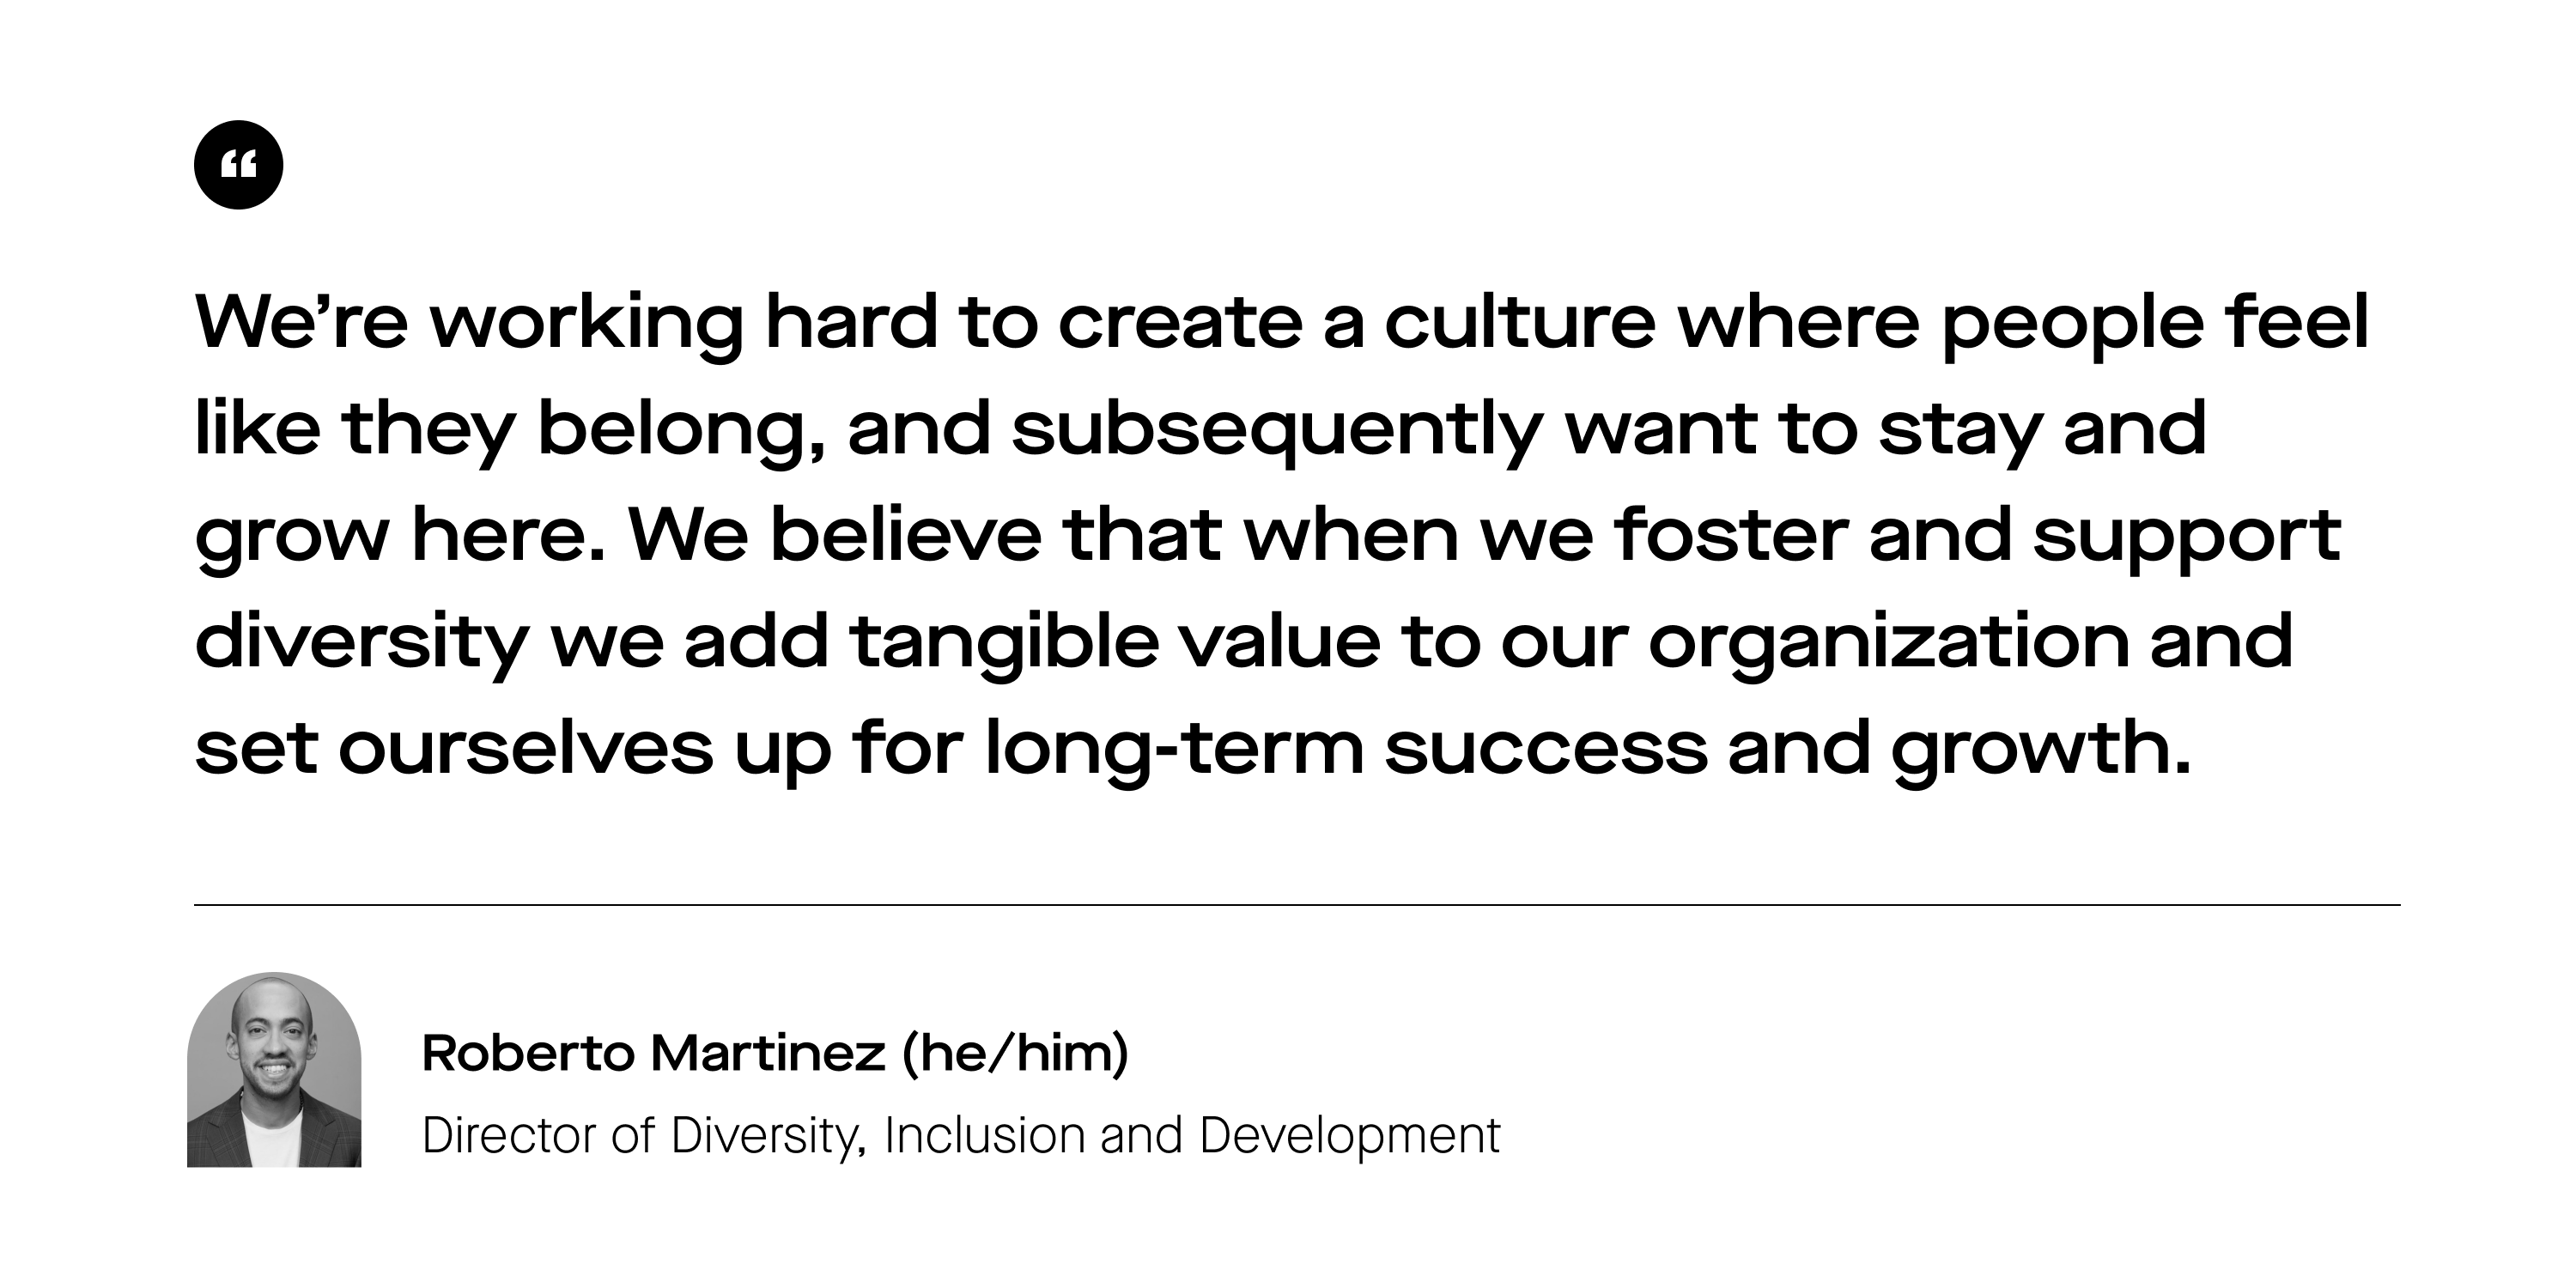 Pullquote in black text against a white background that reads: "We’re working hard to create a culture where people feel like they belong, and subsequently want to stay and grow here. We believe that when we foster and support diversity we add tangible value to our organization and set ourselves up for long-term success and growth."